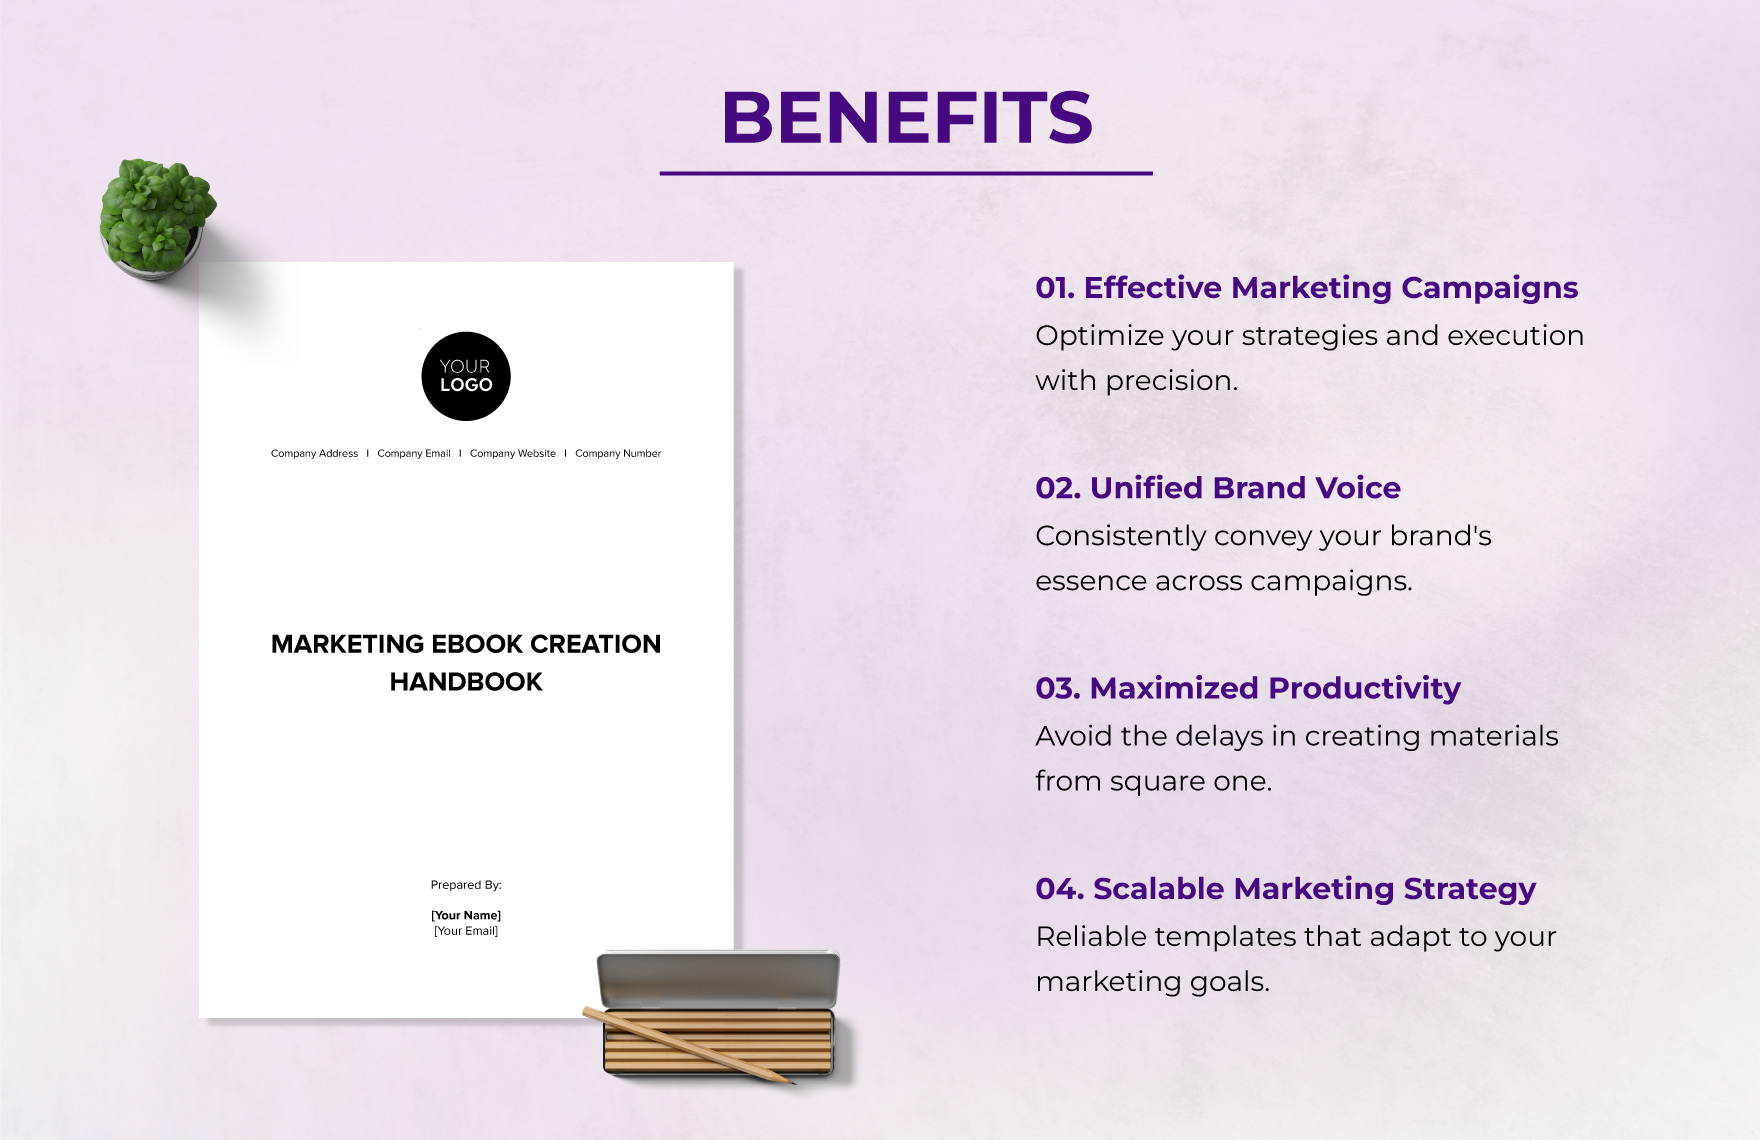 Marketing Multimedia Content Feasibility Study Template